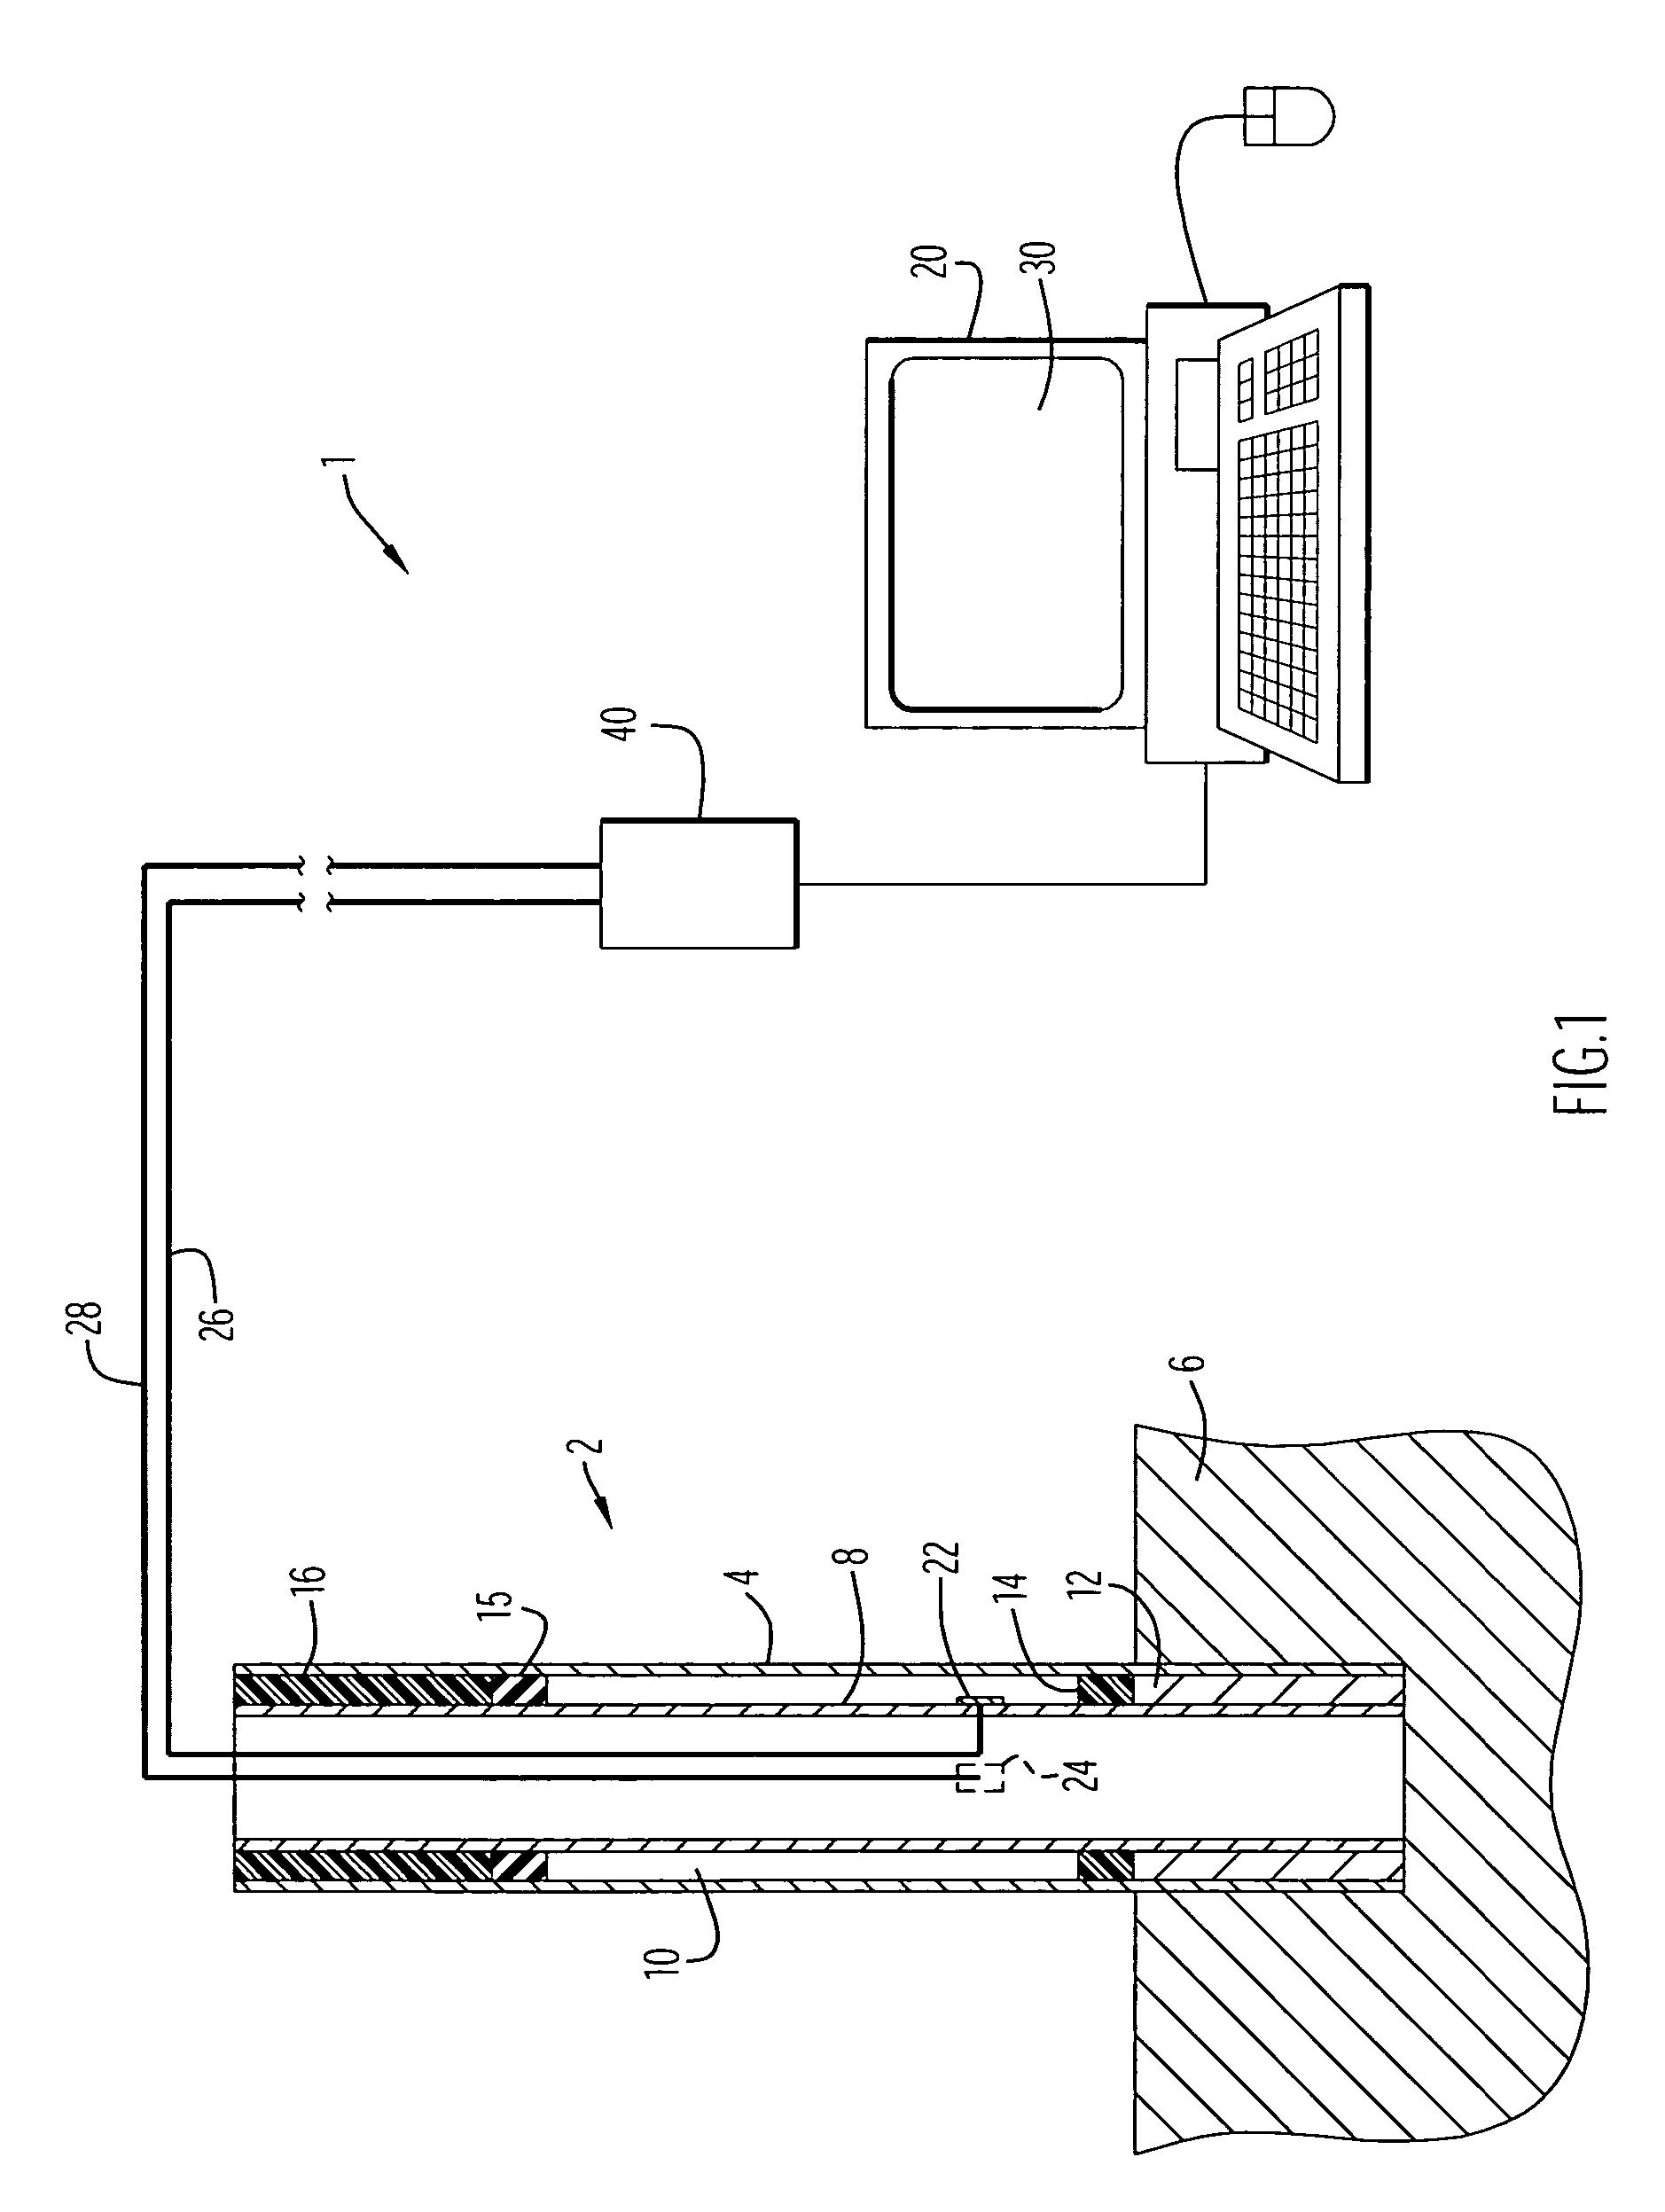 Force measurement system for an isometric exercise device